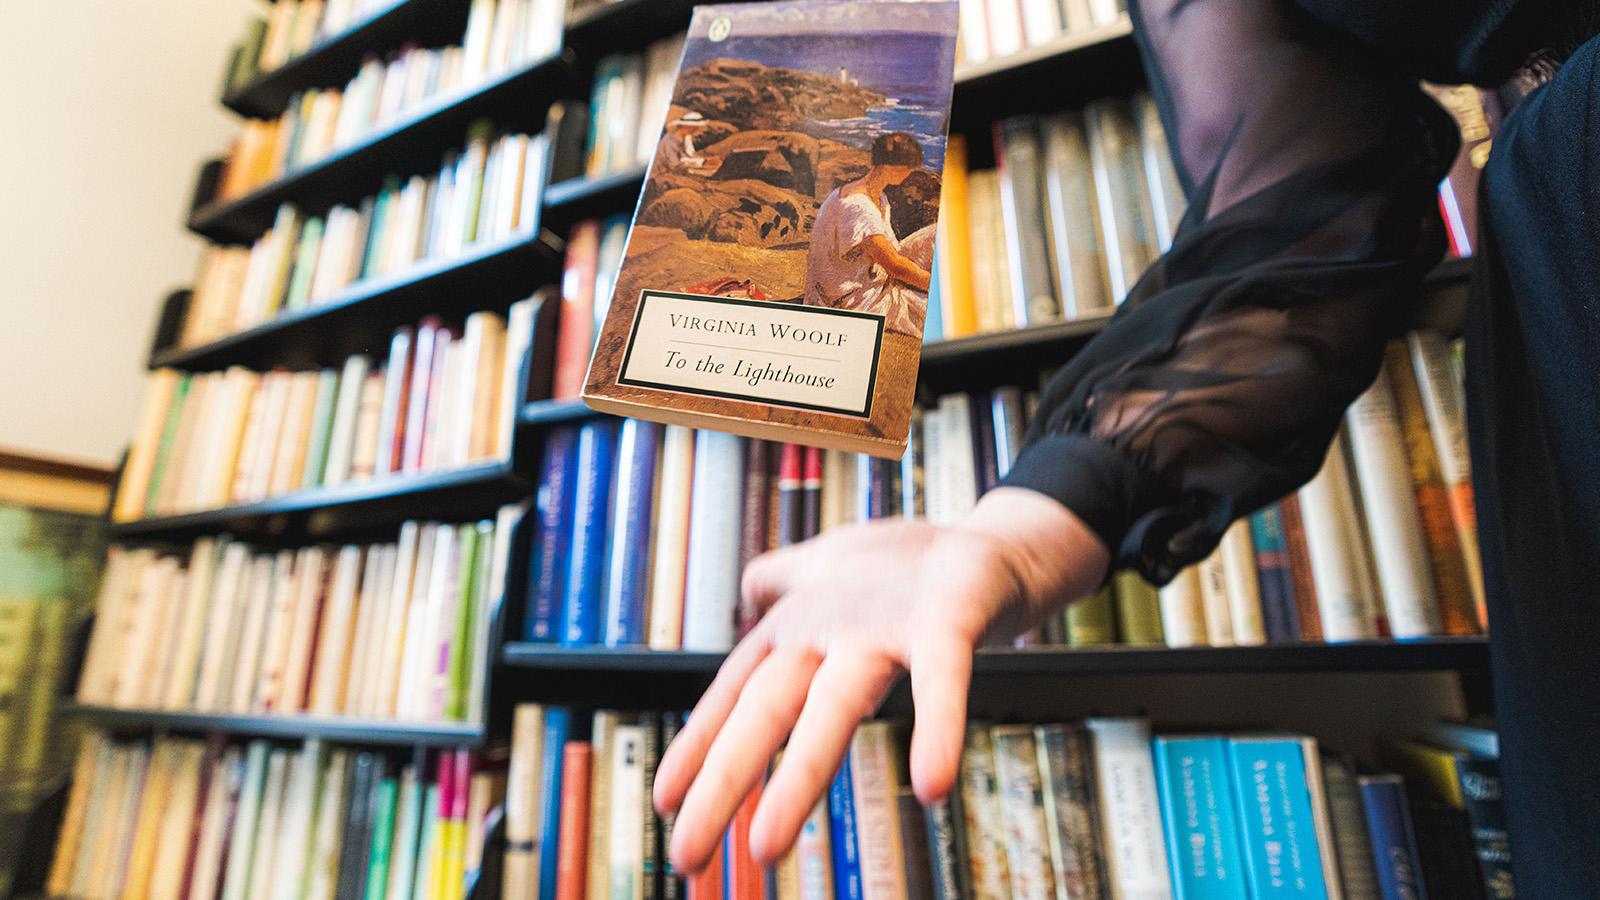 Virginia Woolf's To The Lighthouse floats above a hand, in the background are rows of books